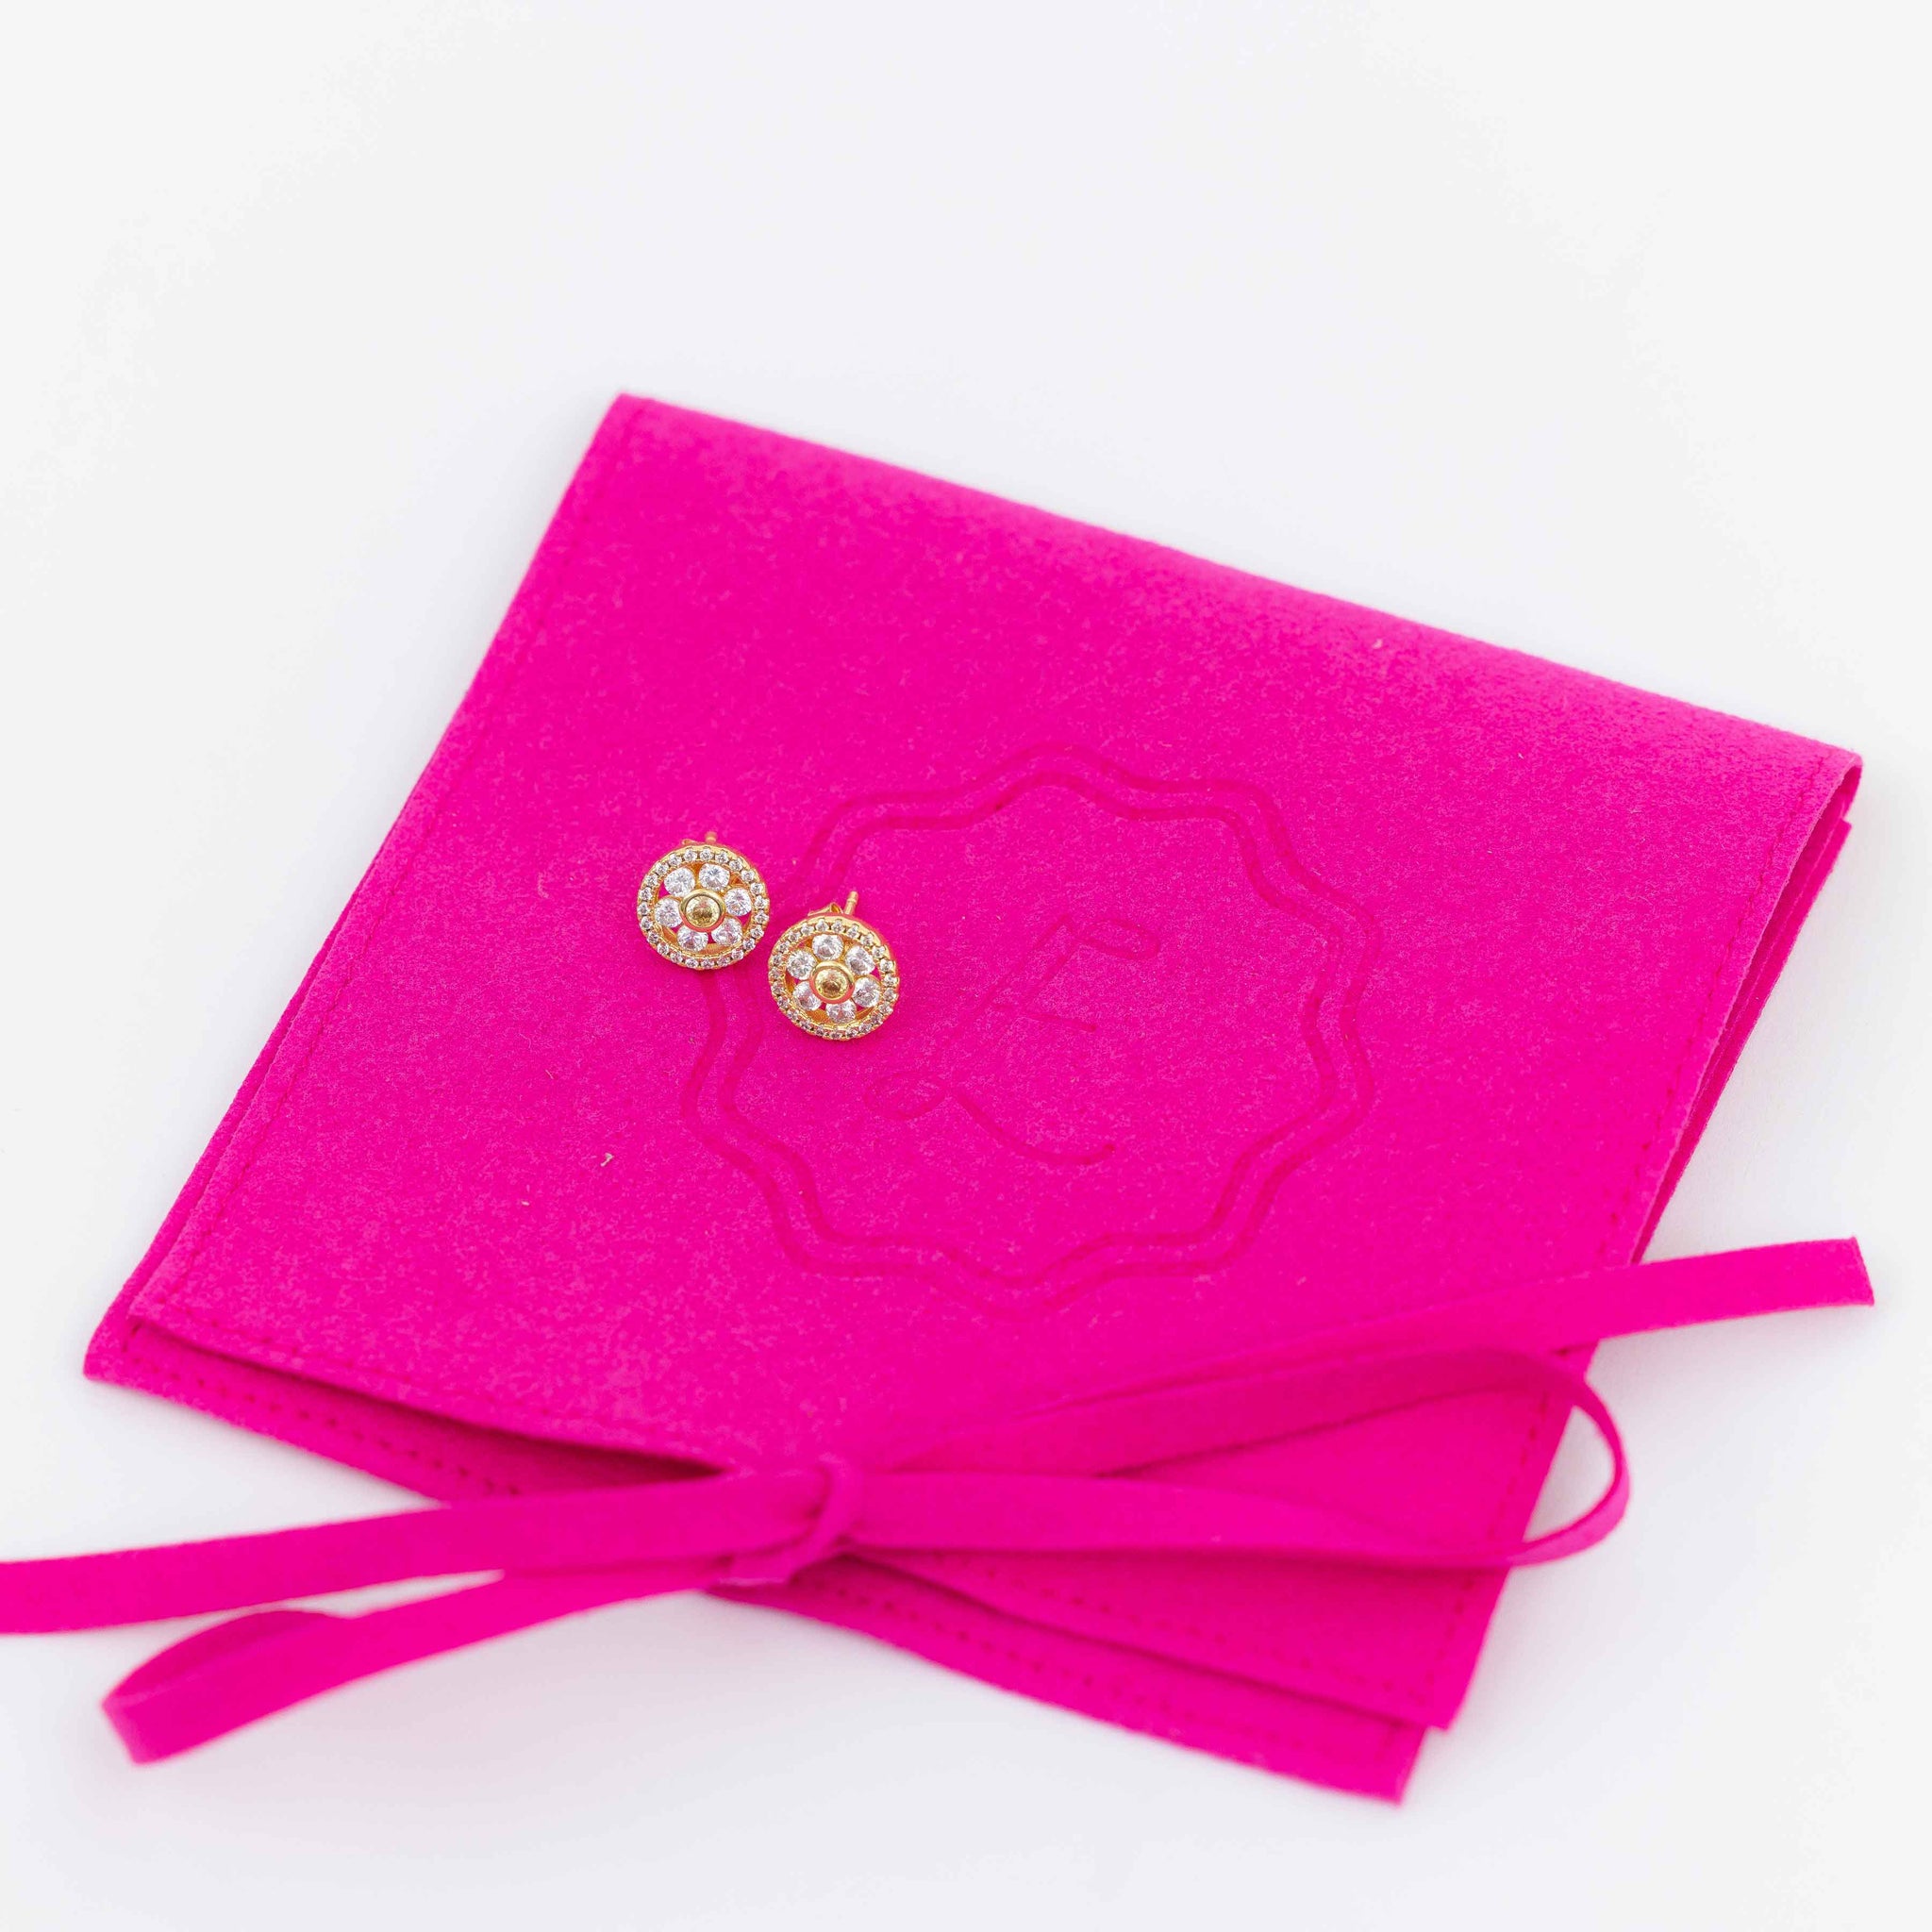 The Happily Eva After Collection Daisy Studs come with a reusable suede pouch